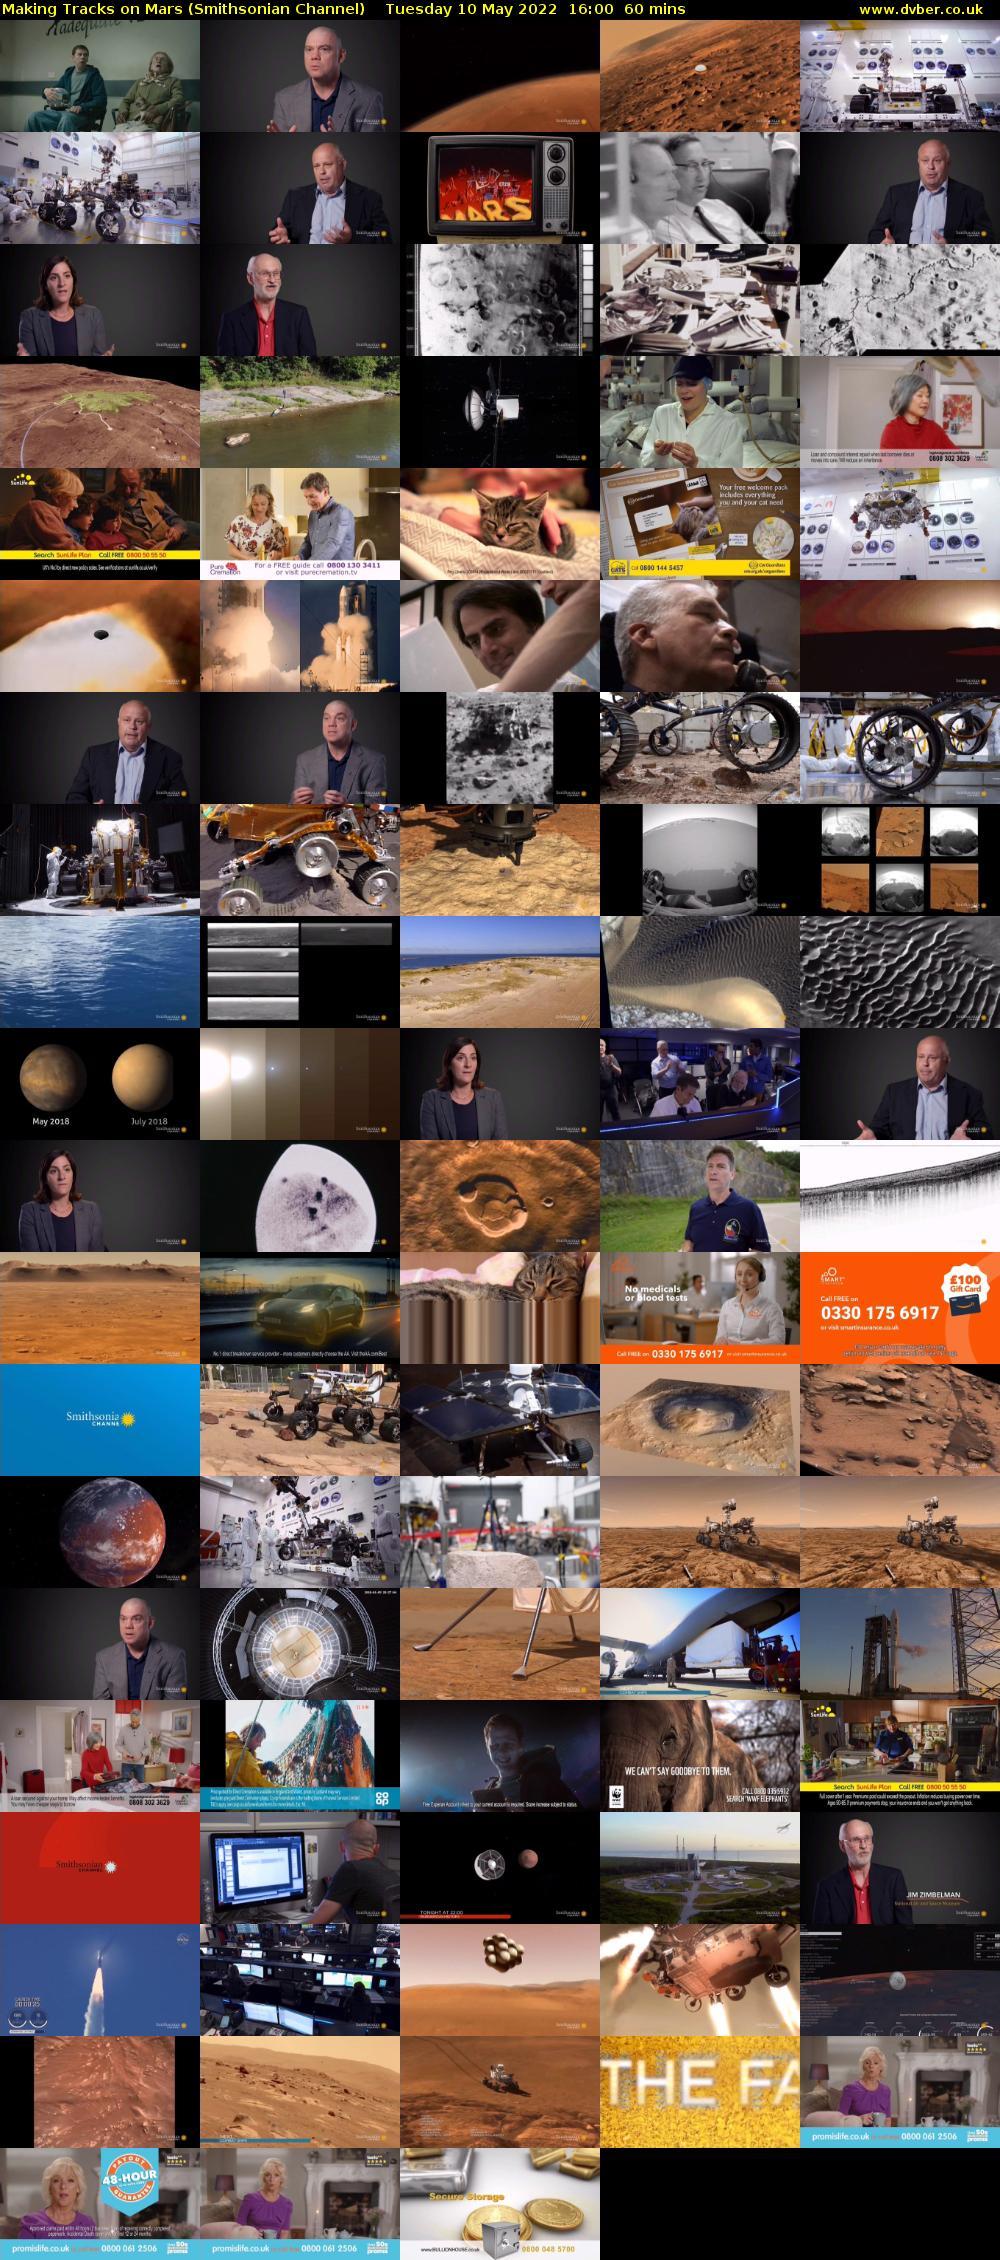 Making Tracks on Mars (Smithsonian Channel) Tuesday 10 May 2022 16:00 - 17:00